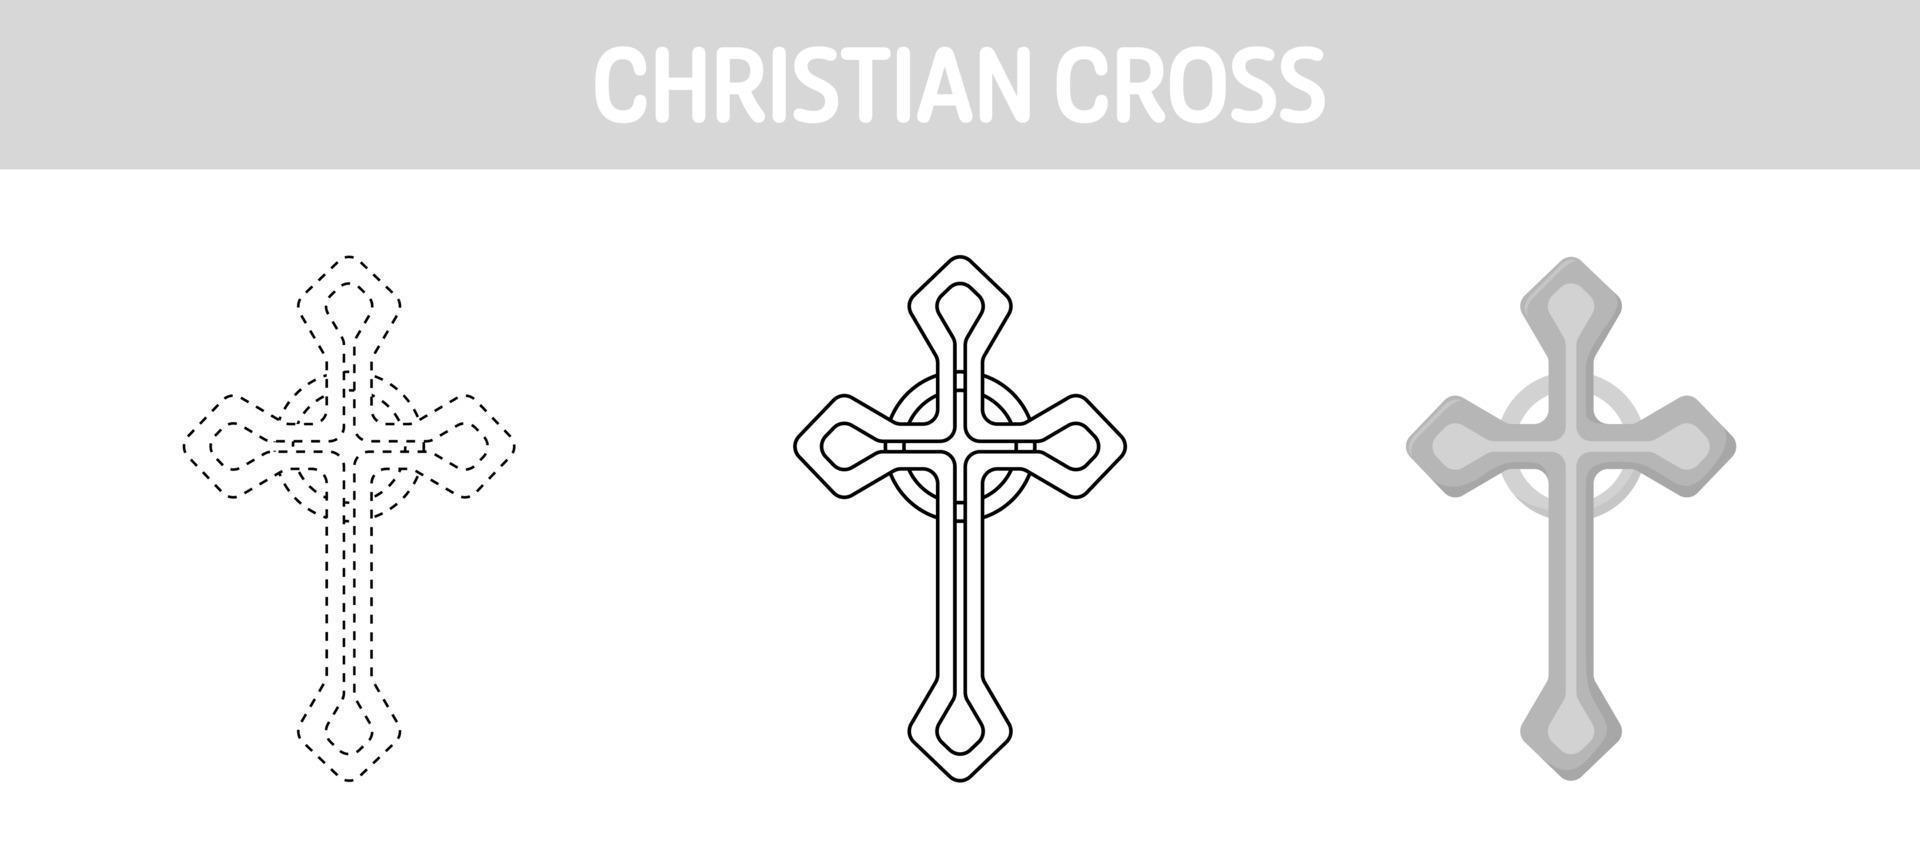 Christian Cross tracing and coloring worksheet for kids vector